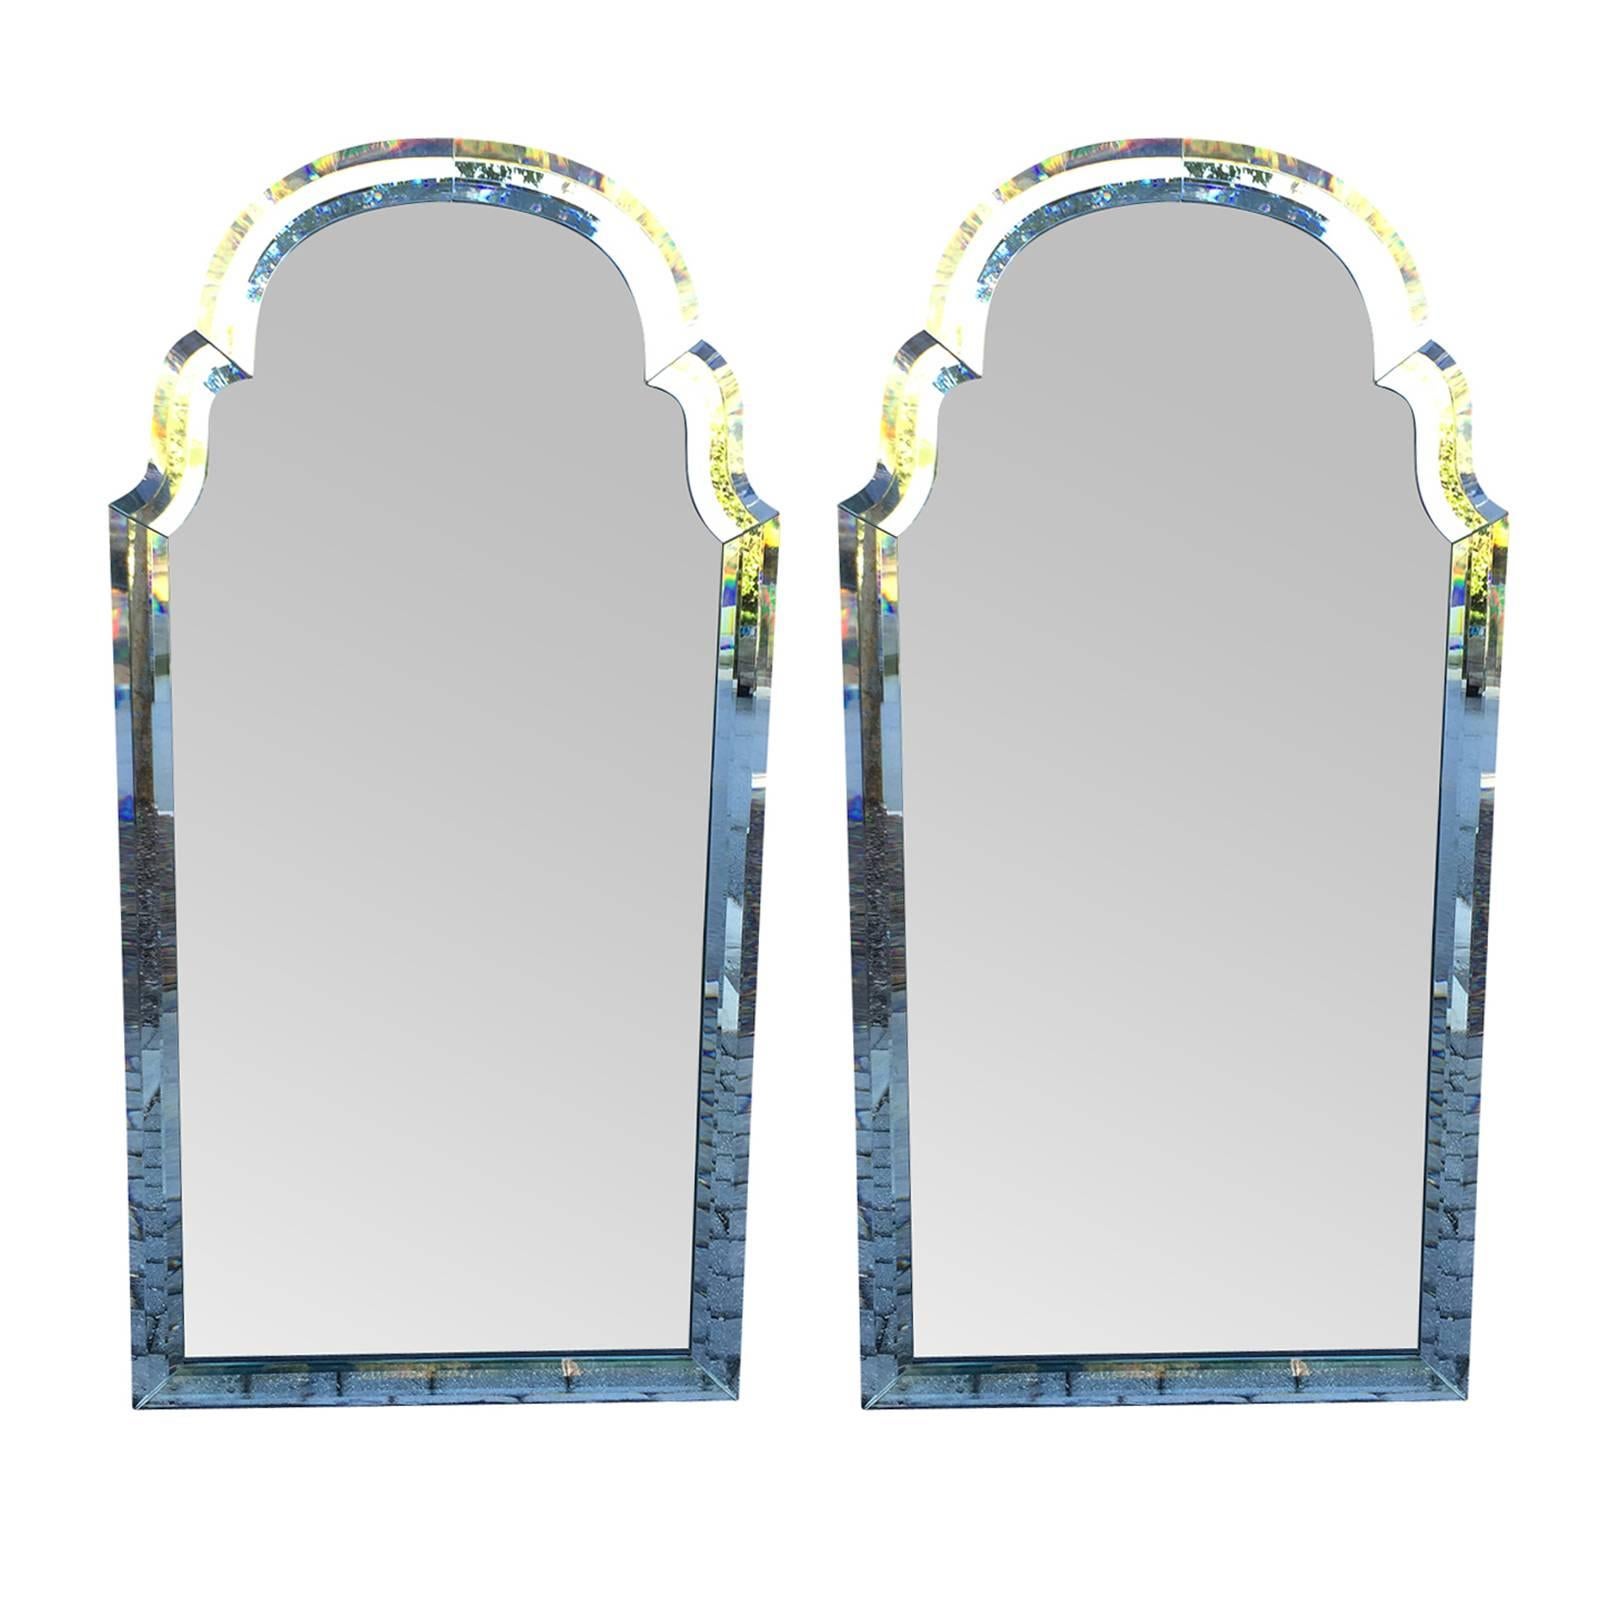 20th Century Pair of Queen Ann Style Venetian Mirrors with Mirrored Frames